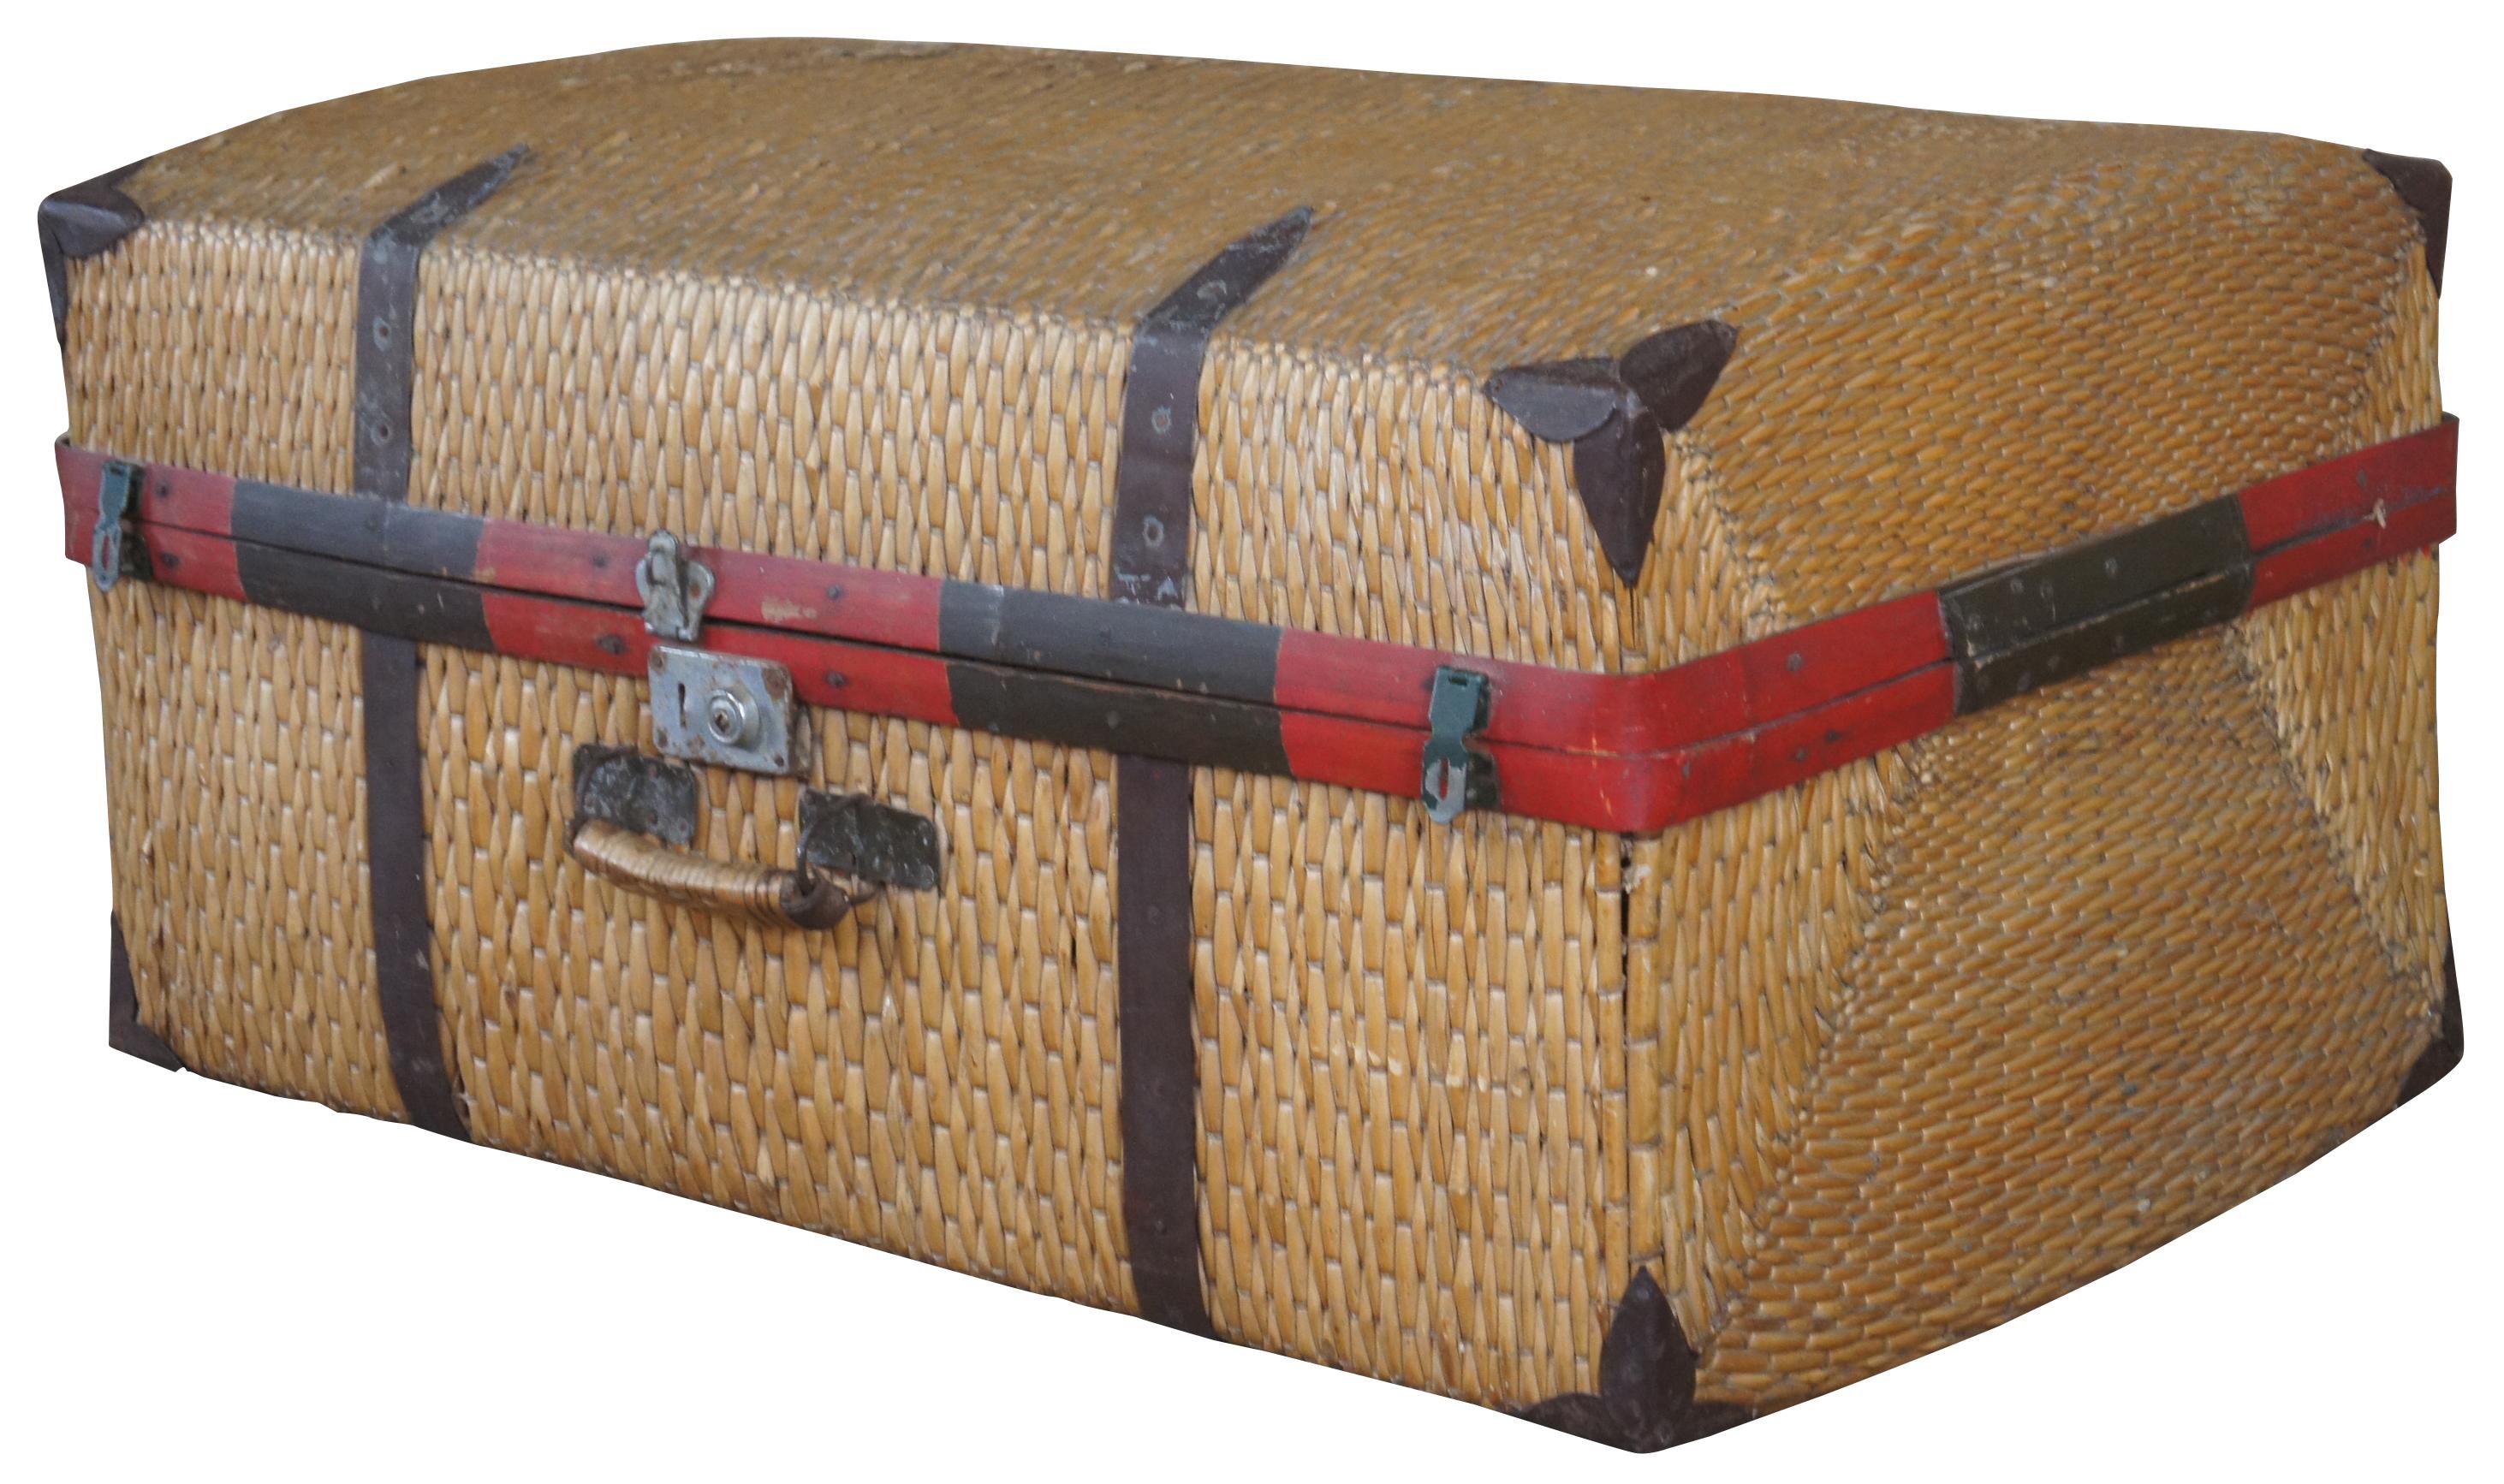 Antique woven rattan bamboo suitcase featuring a red, green and brown bentwood seam and metal hardware to protect the corners. Measures: 34